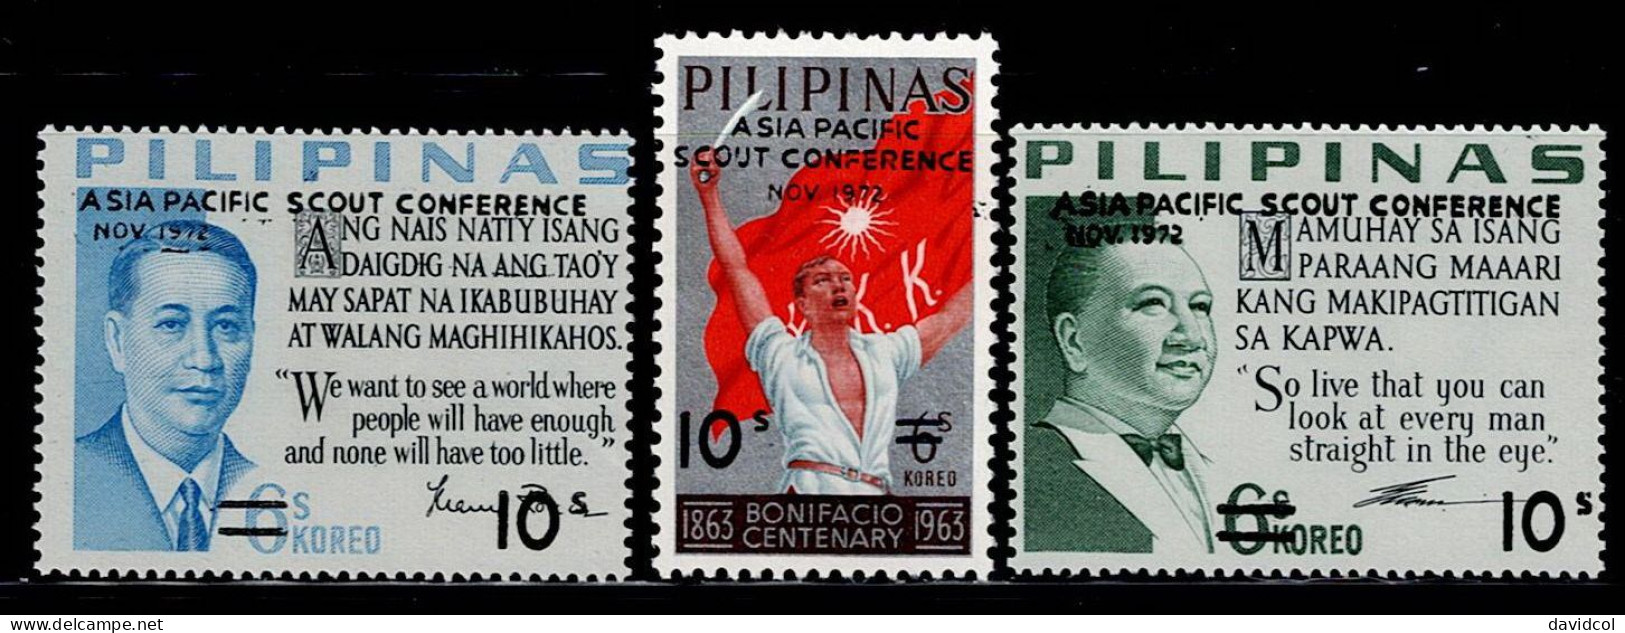 FIL-18- PHILIPPINES - 1972 - MNH -SCOUTS- ASIA-PACIFIC SCOUT CONFERENCE - Filipinas